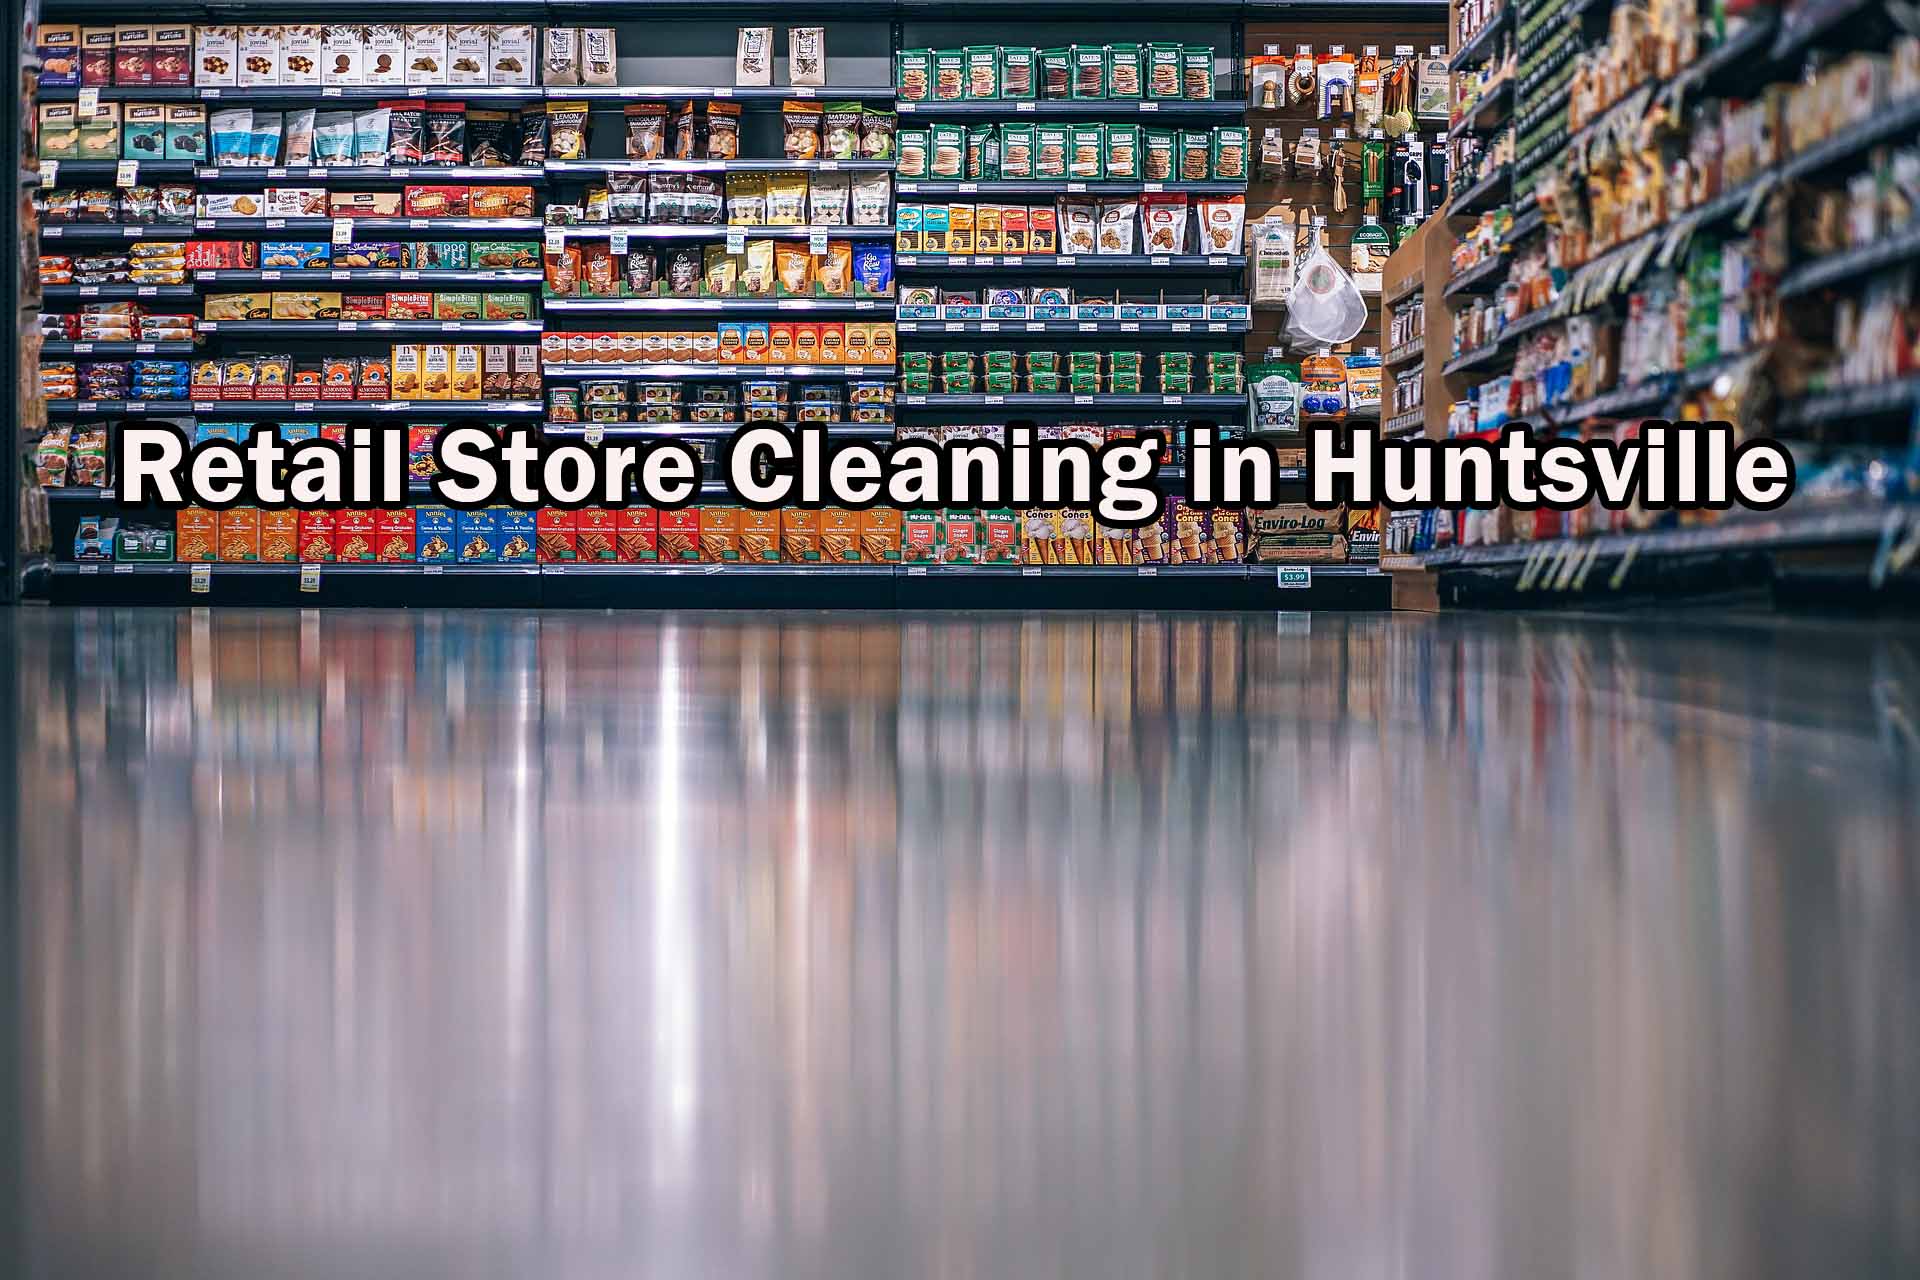 Retail Store Cleaning in Huntsville